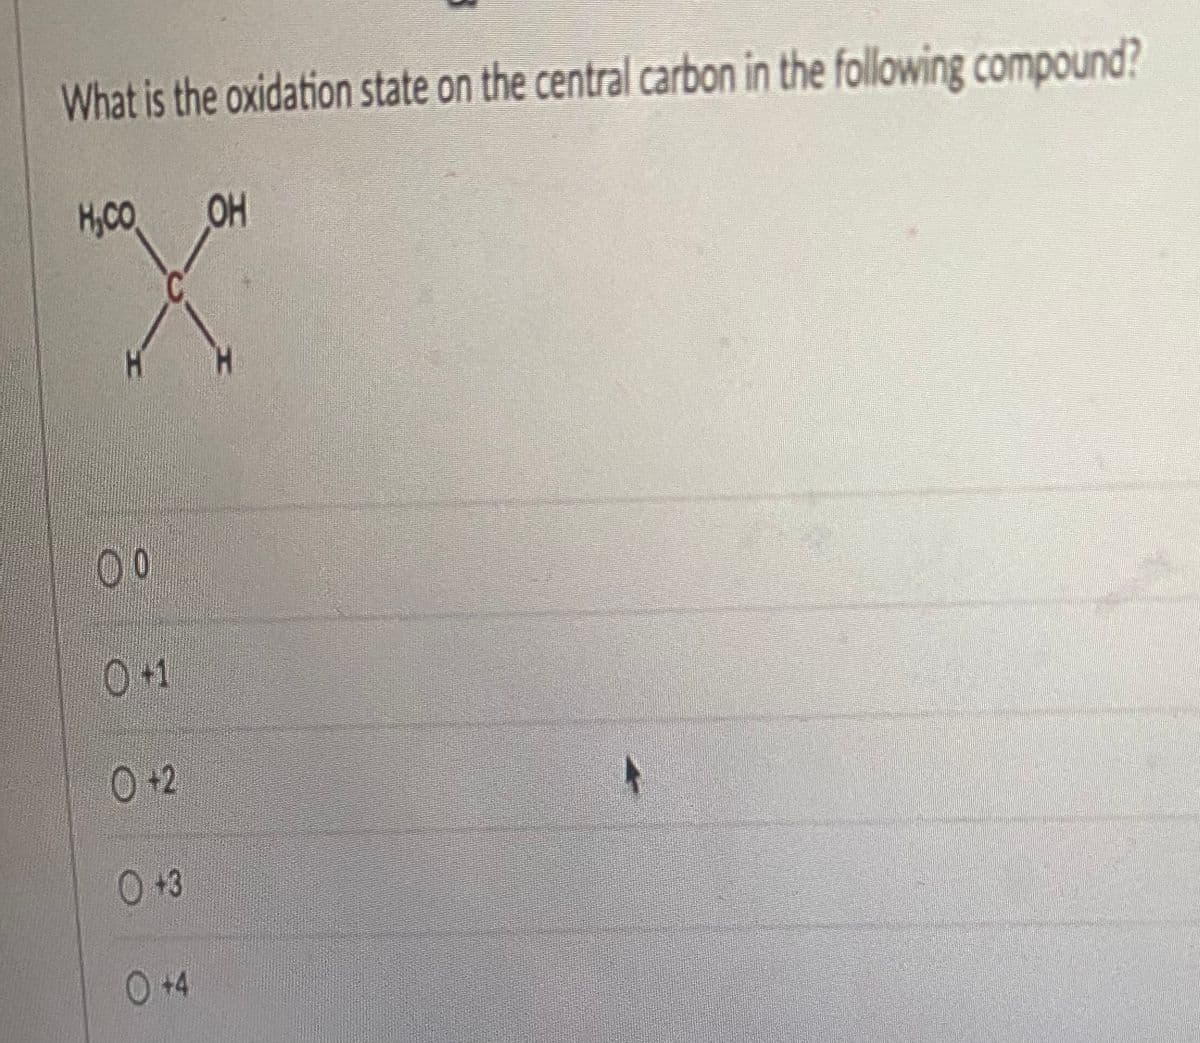 What is the oxidation state on the central carbon in the following compound?
Hyco
OH
00
0 +1
0 +2
N
0+3
○ +4